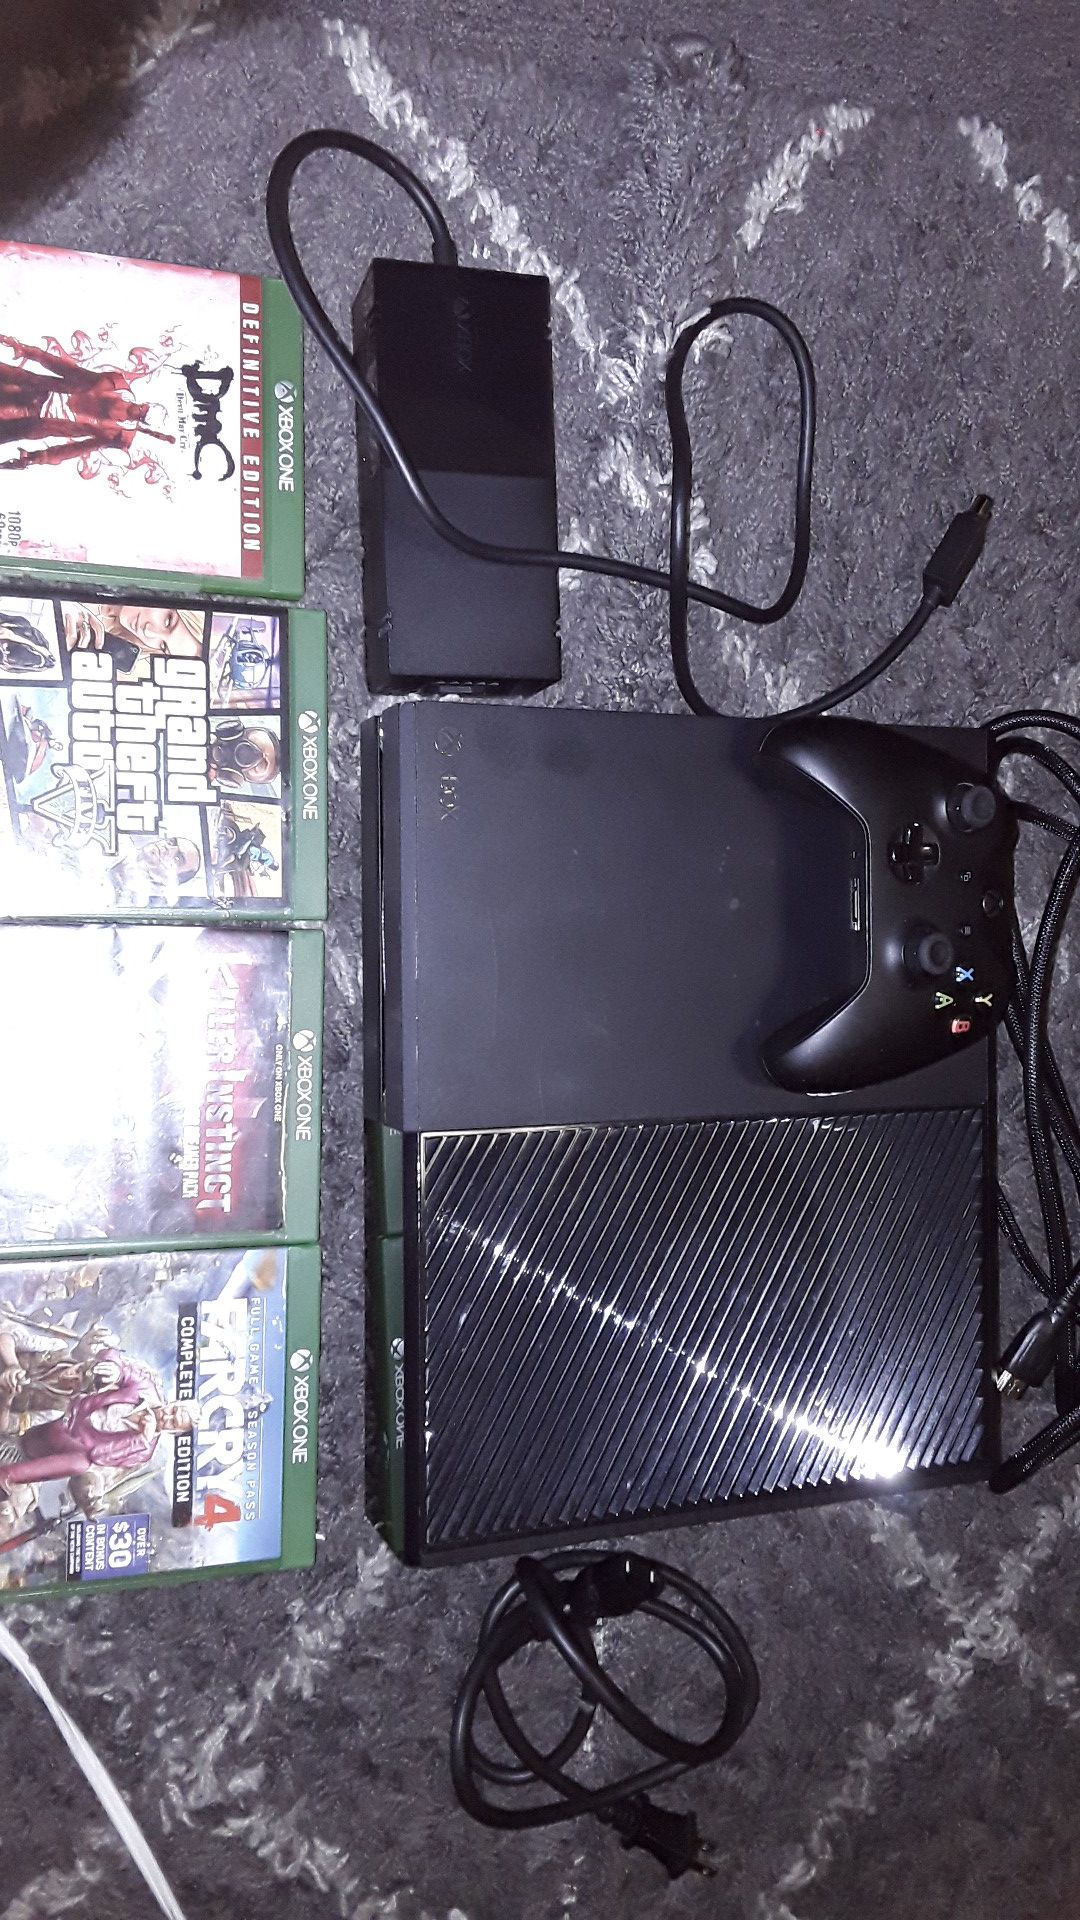 500GB XBOX ONE gaming console with 4 games and controller